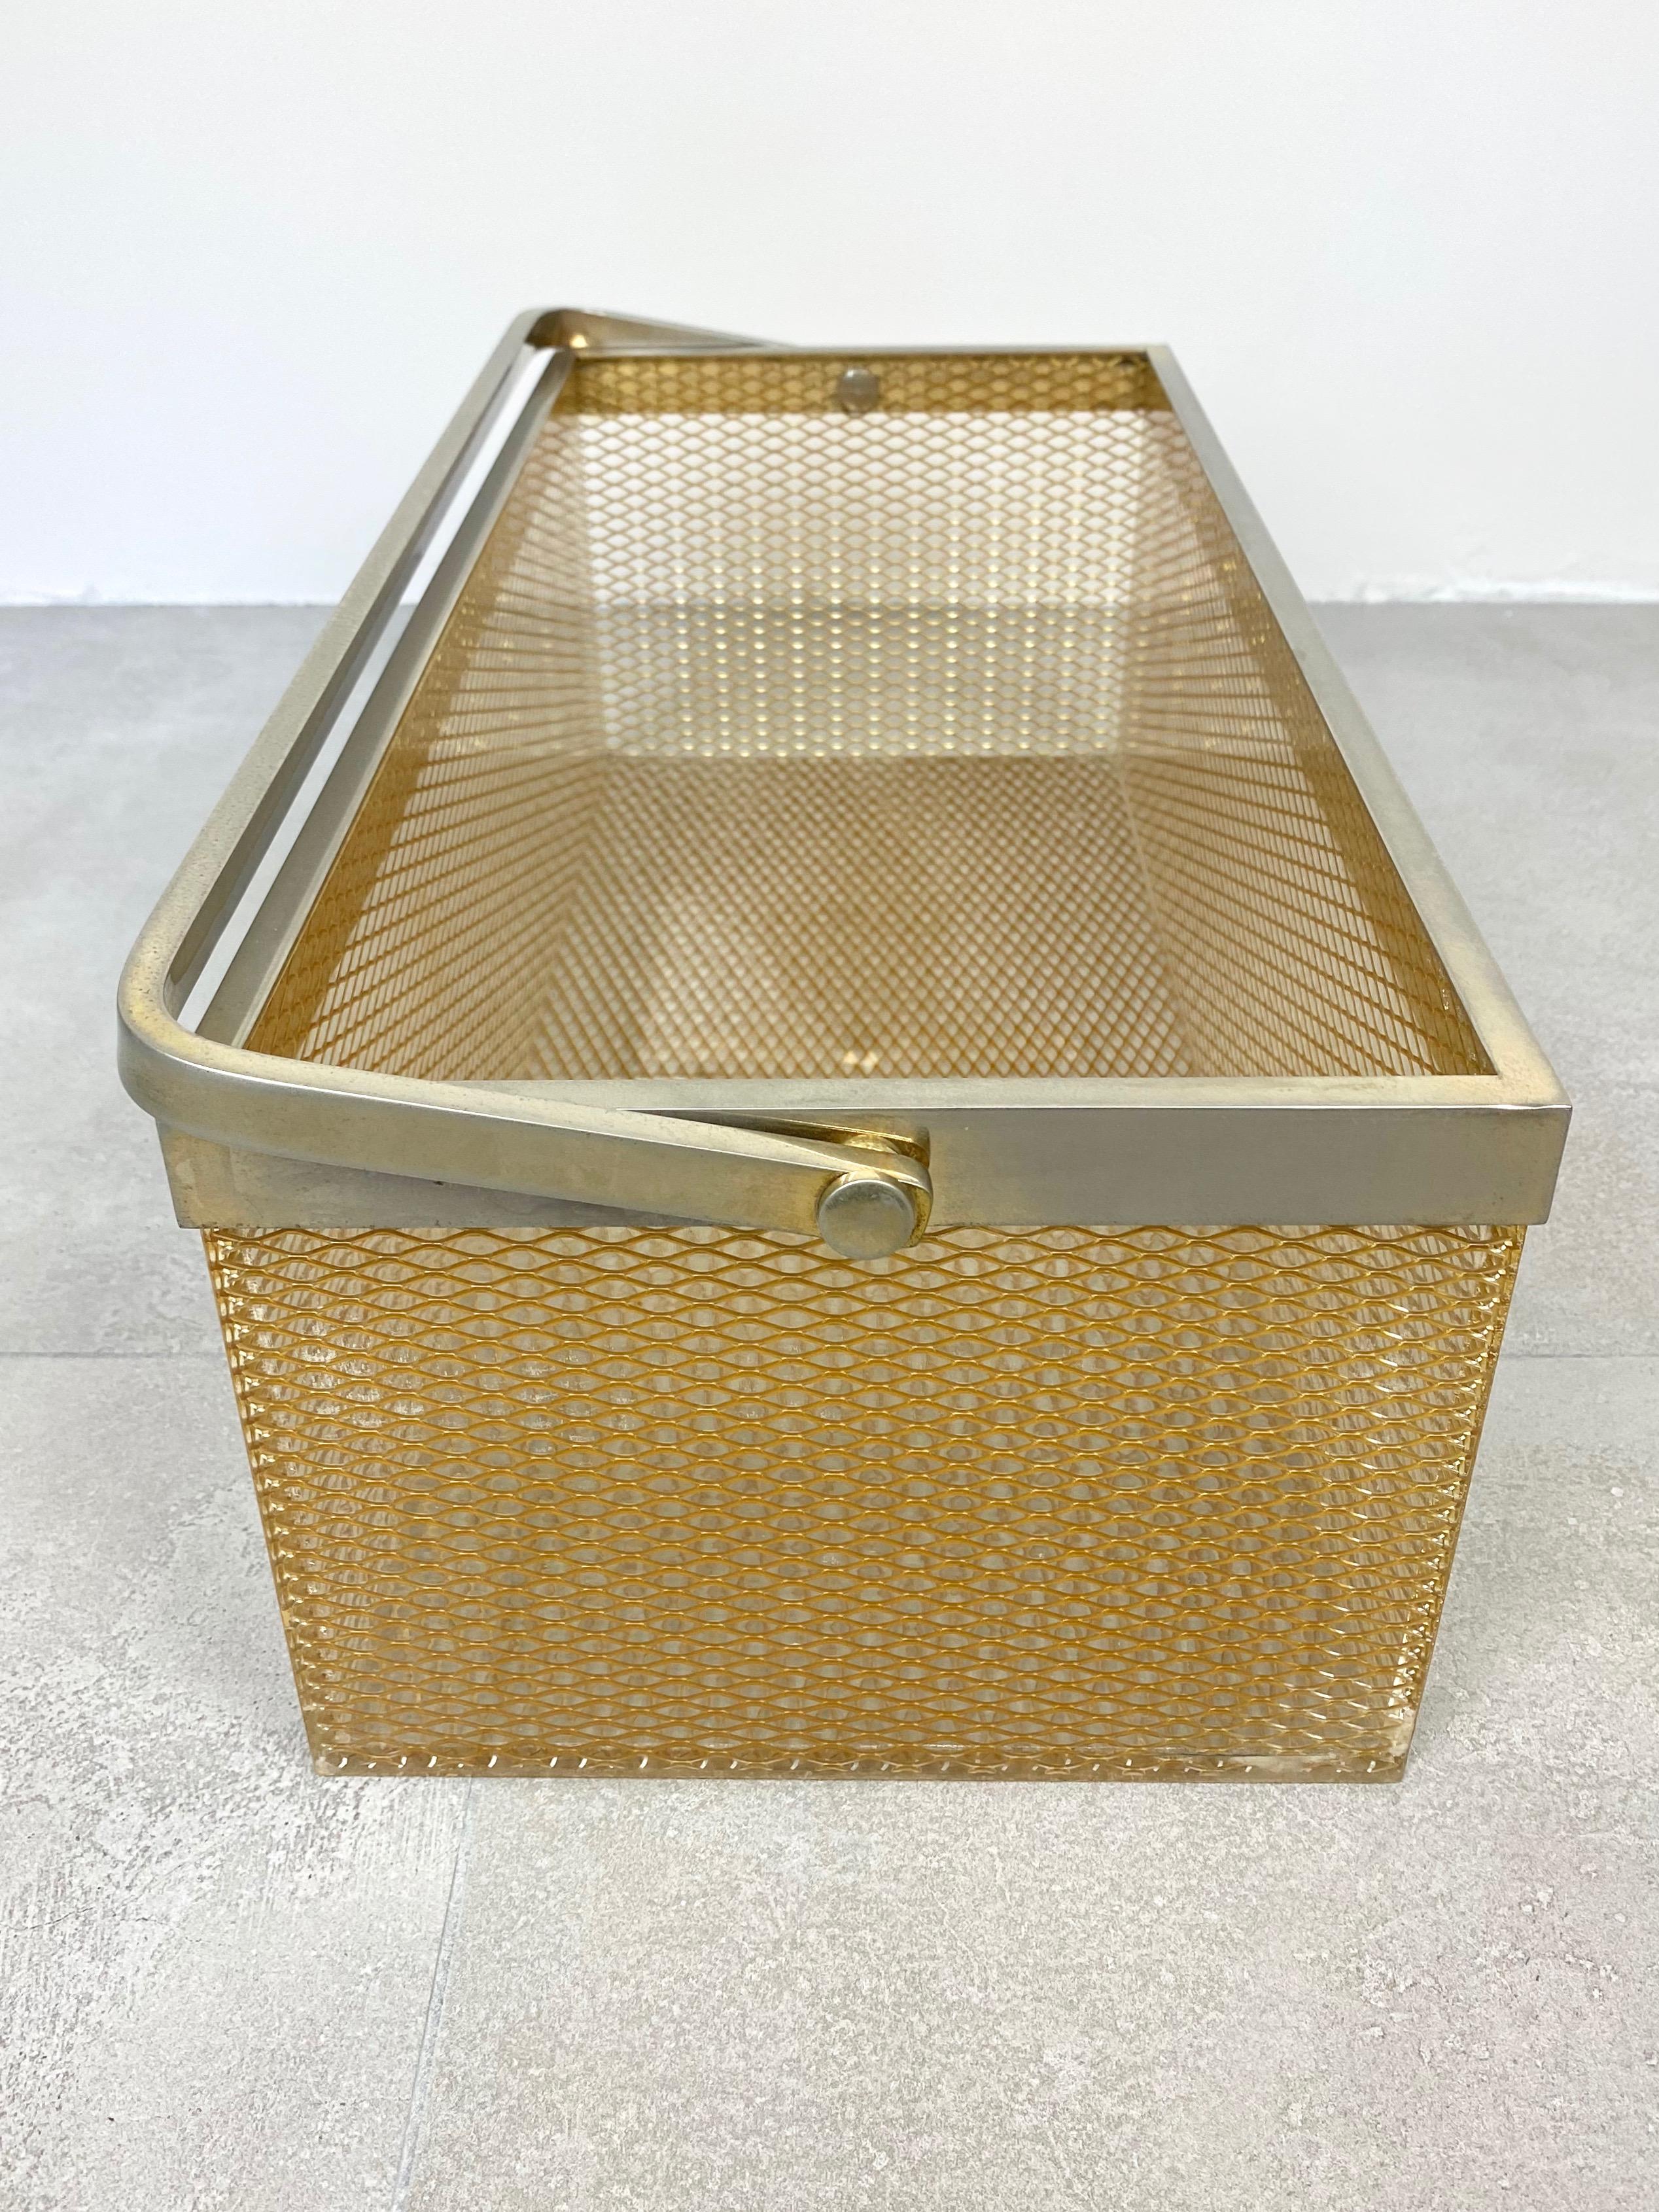 Resin Magazine Holder Rack in Nickel and Netting Lucite, Italy, 1970s For Sale